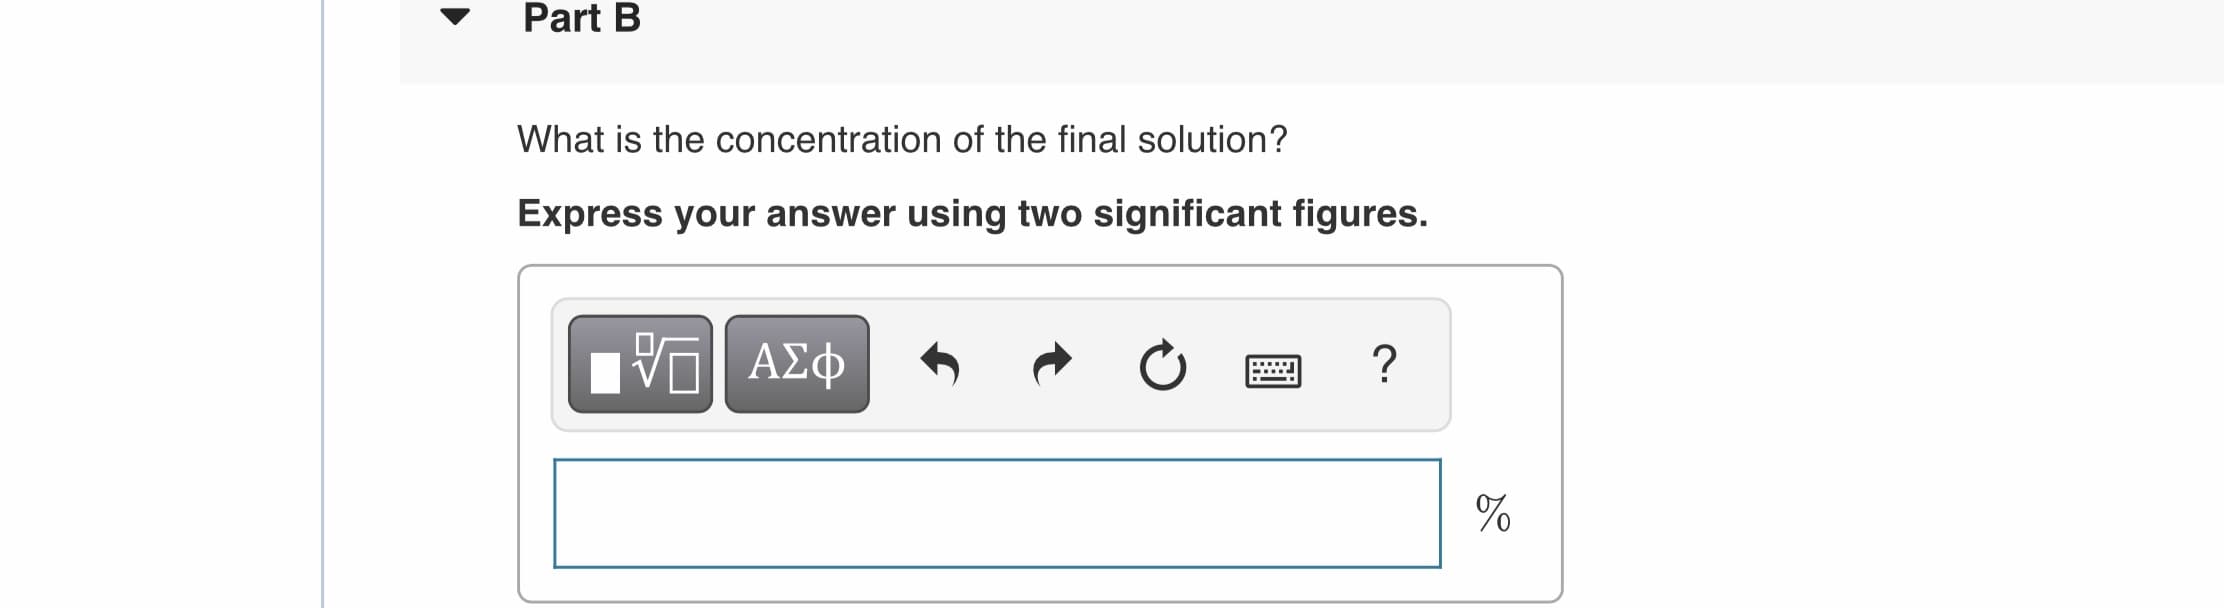 Part B
What is the concentration of the final solution?
Express your answer using two significant figures.
ν ΑΣφ
